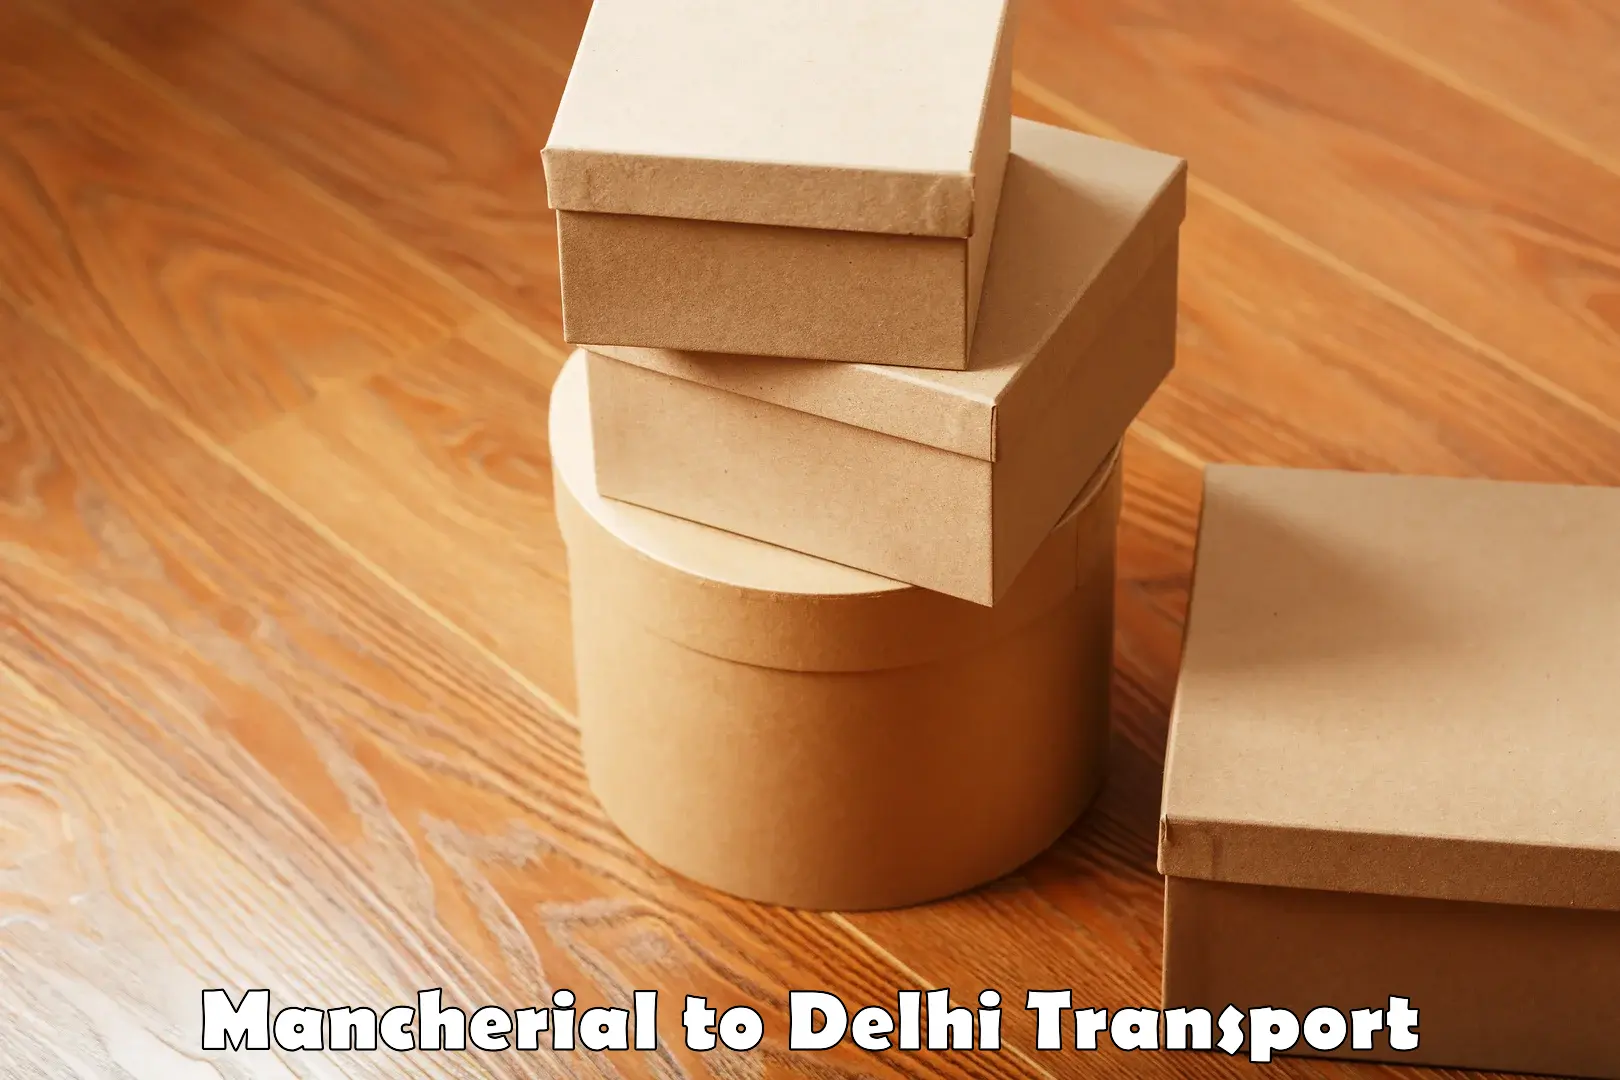 Daily parcel service transport Mancherial to Delhi